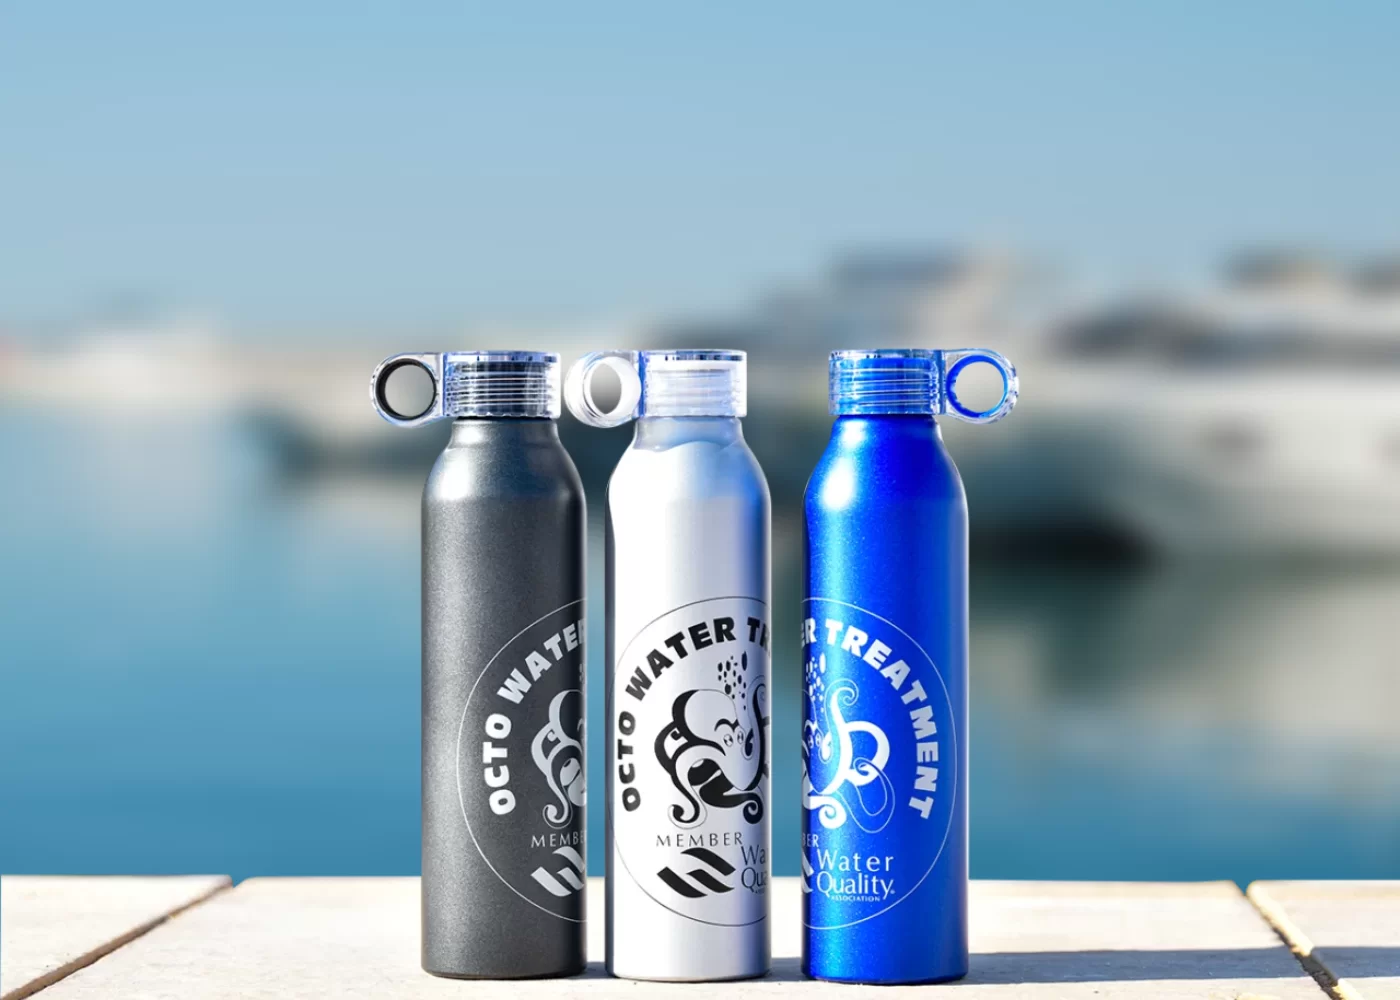 Octo Marines Think outside the bottle leading the way in reducing plastic waste